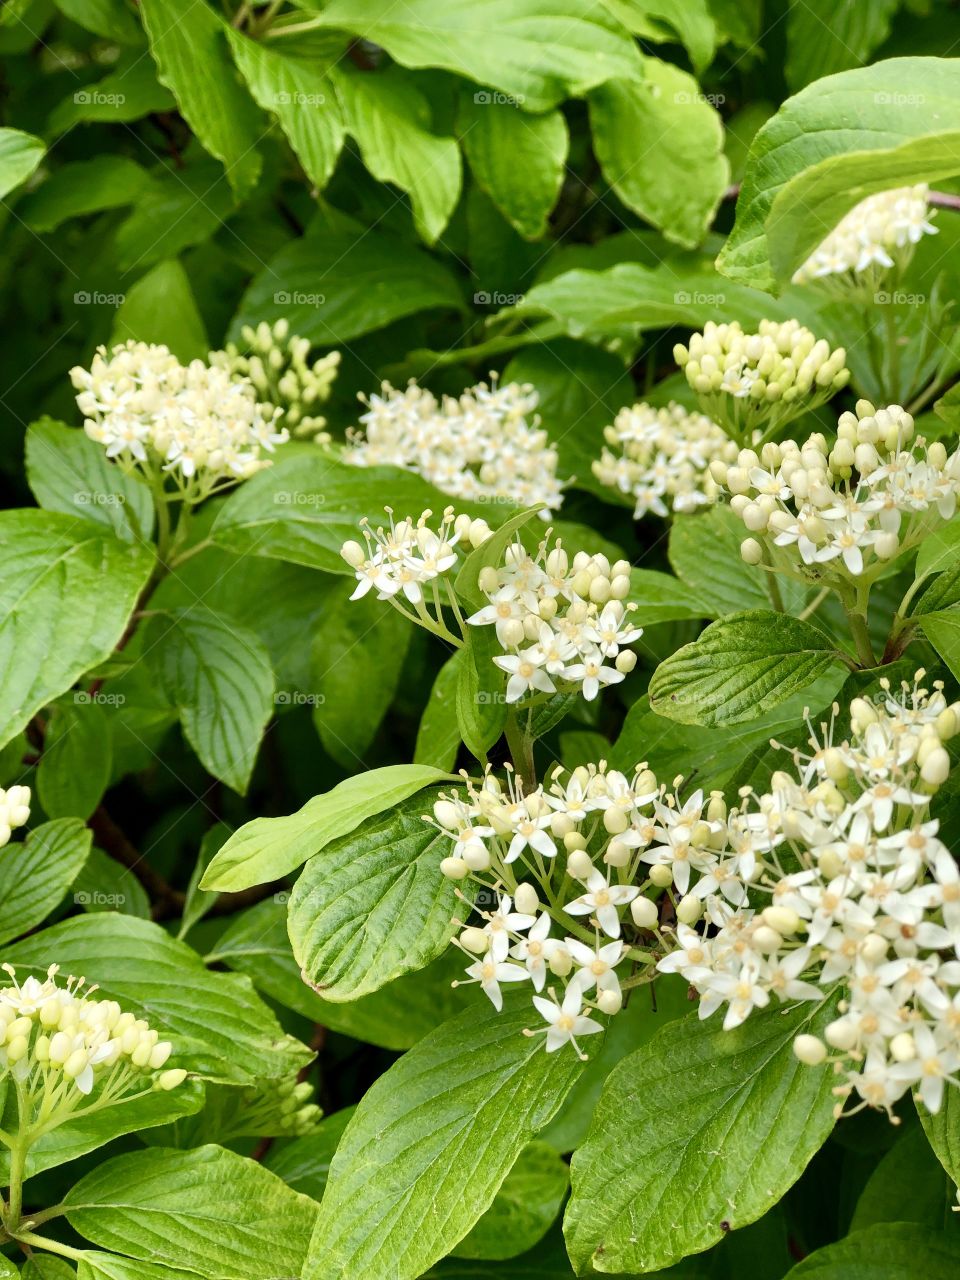 Clusters of white flowers 